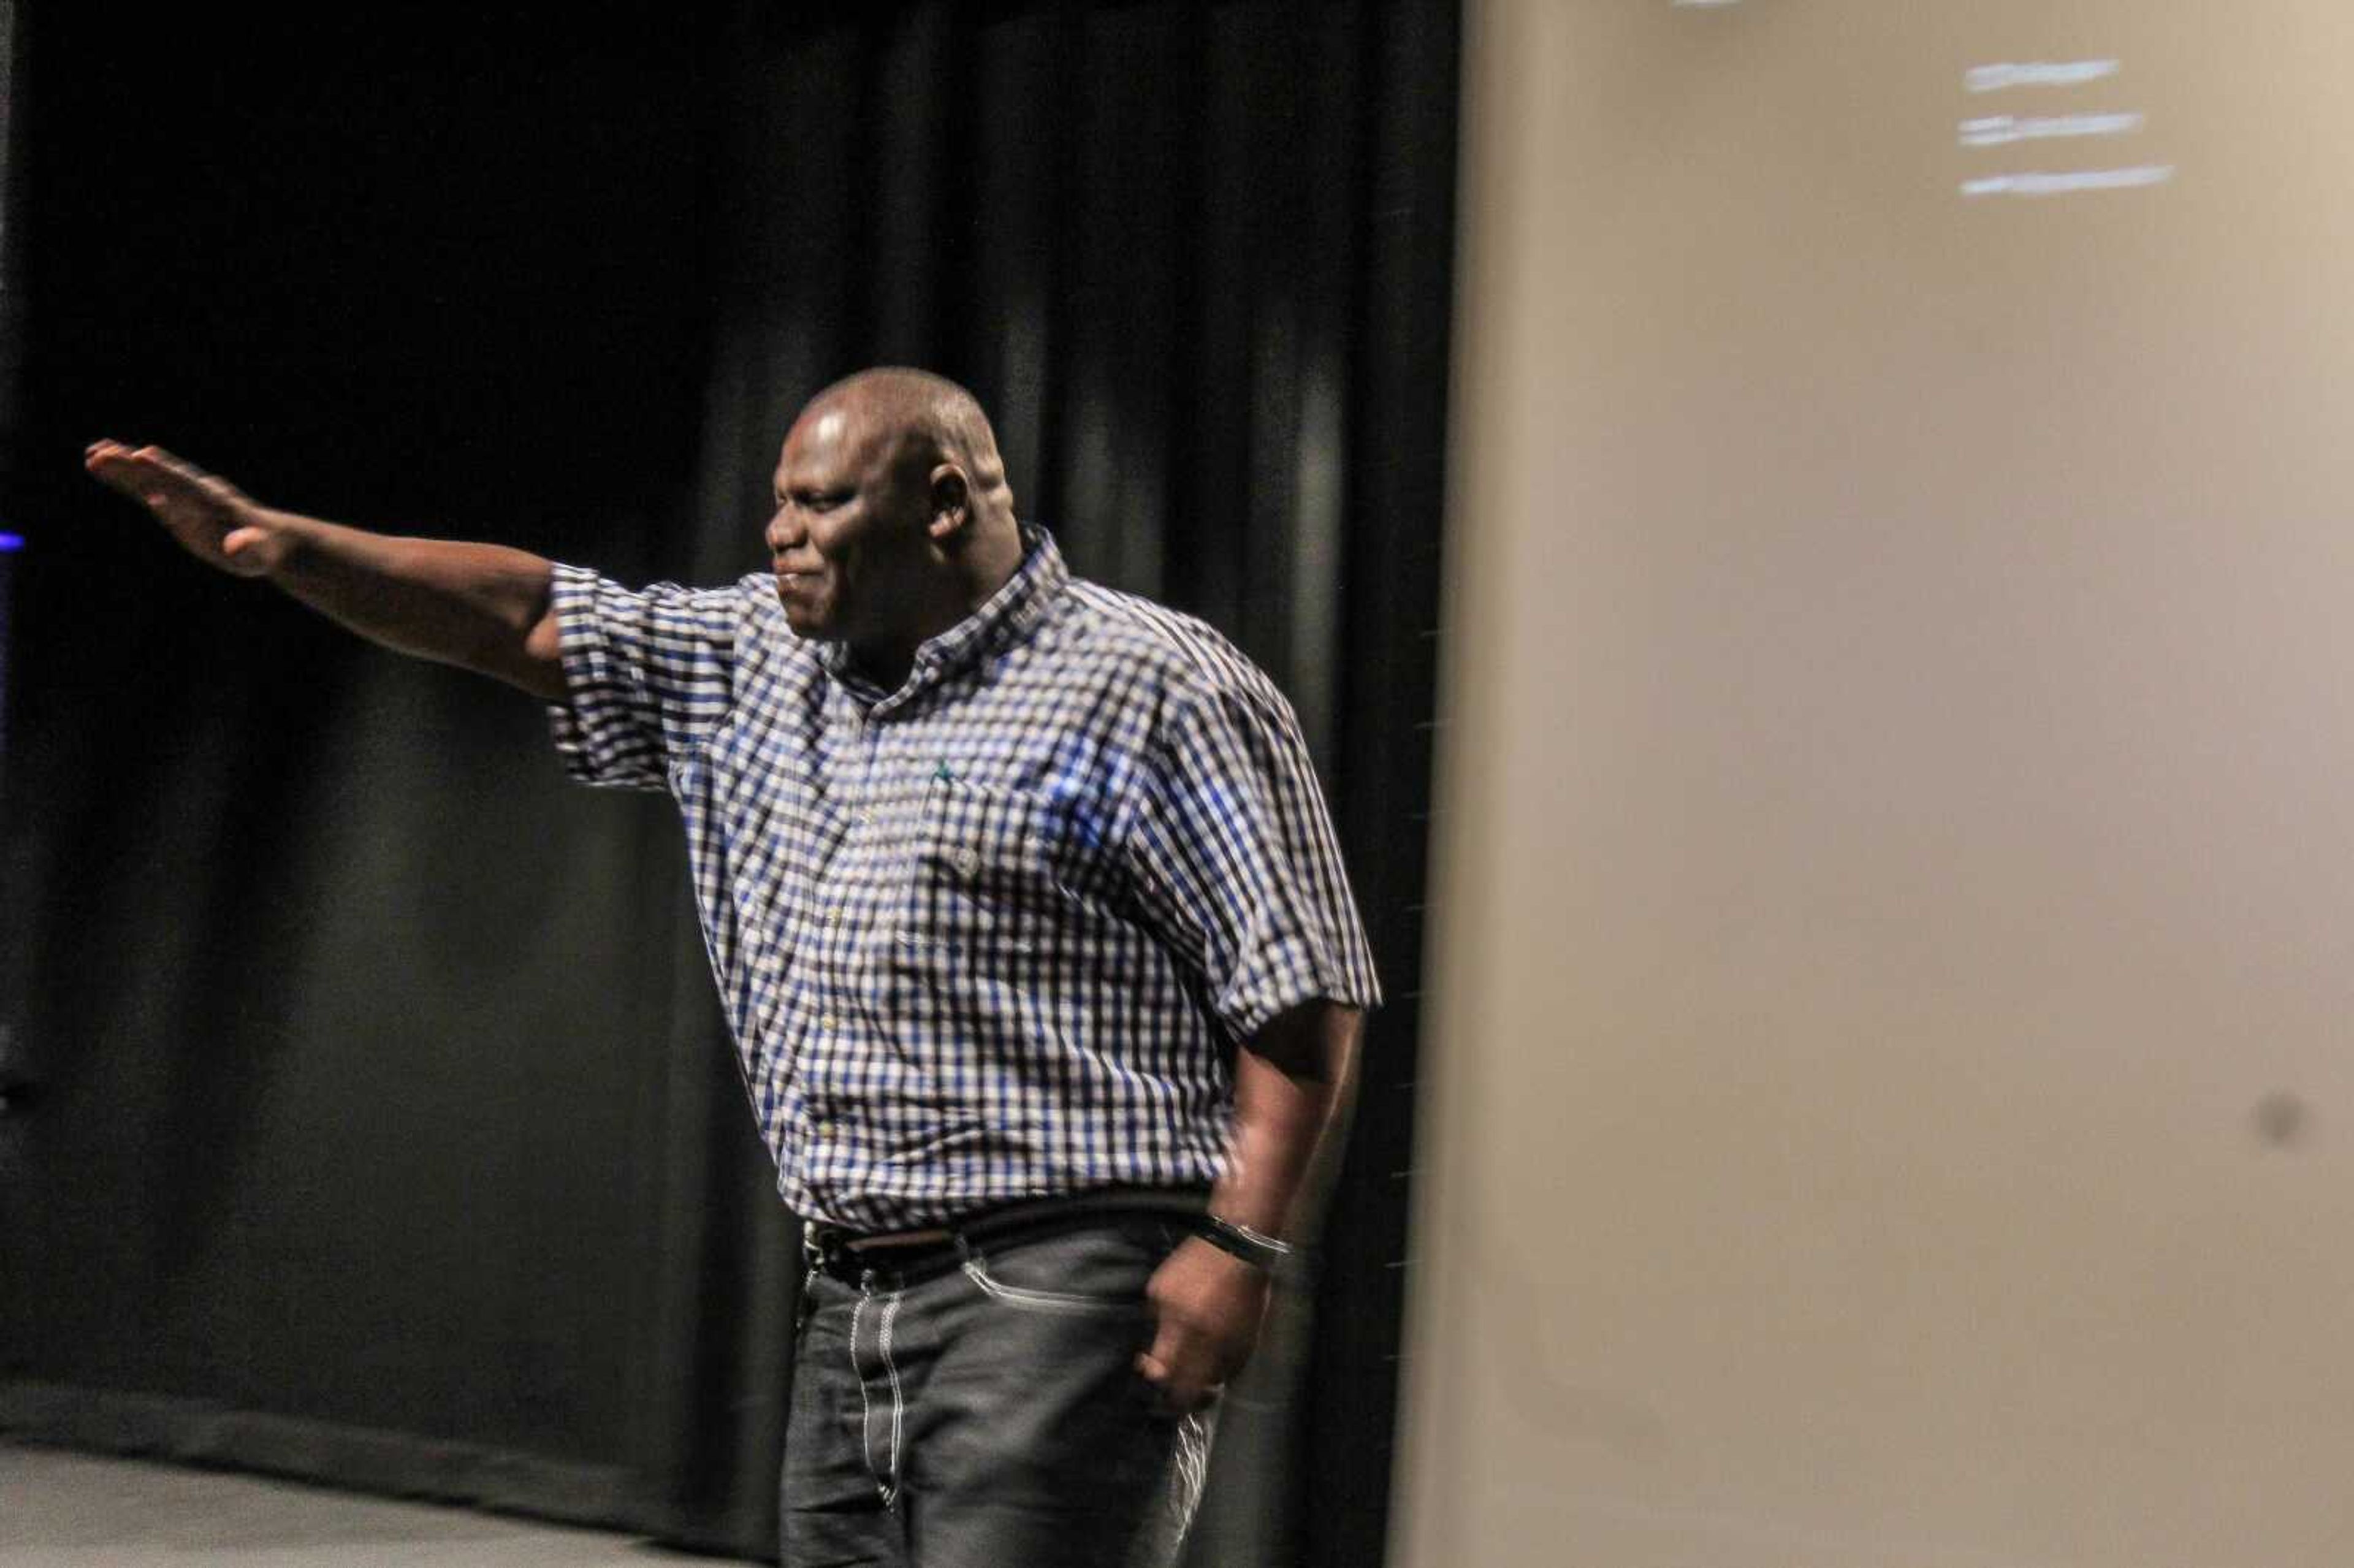 “The Past is Never Dead:” Documentary of David Robinson’s exoneration screens in Rose Theater